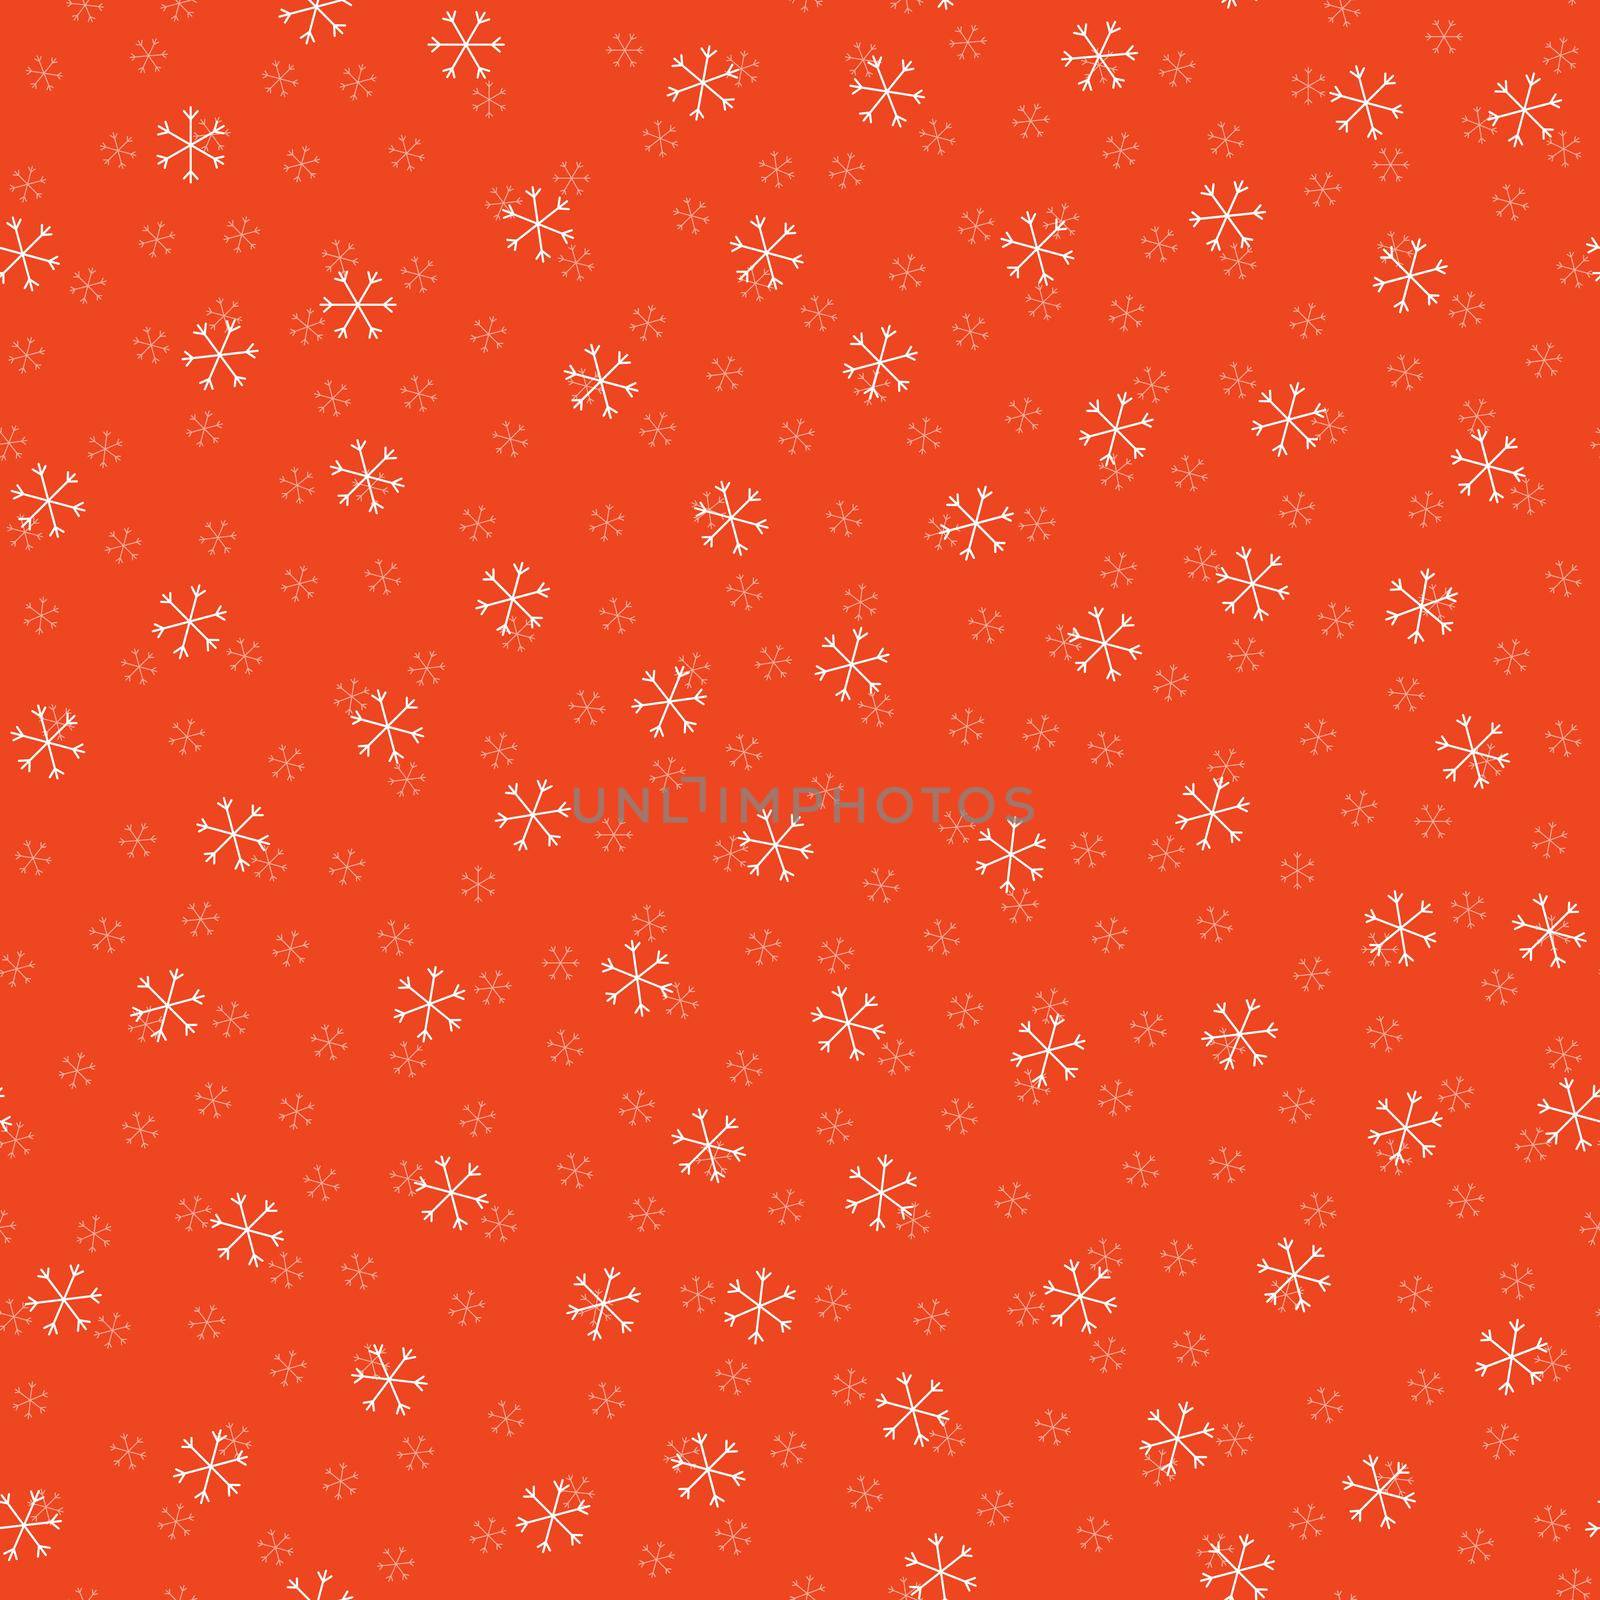 Seamless Christmas pattern doodle with hand random drawn snowflakes.Wrapping paper for presents, funny textile fabric print, design,decor, food wrap, backgrounds. new year.Raster copy.Coral, pink by Angelsmoon